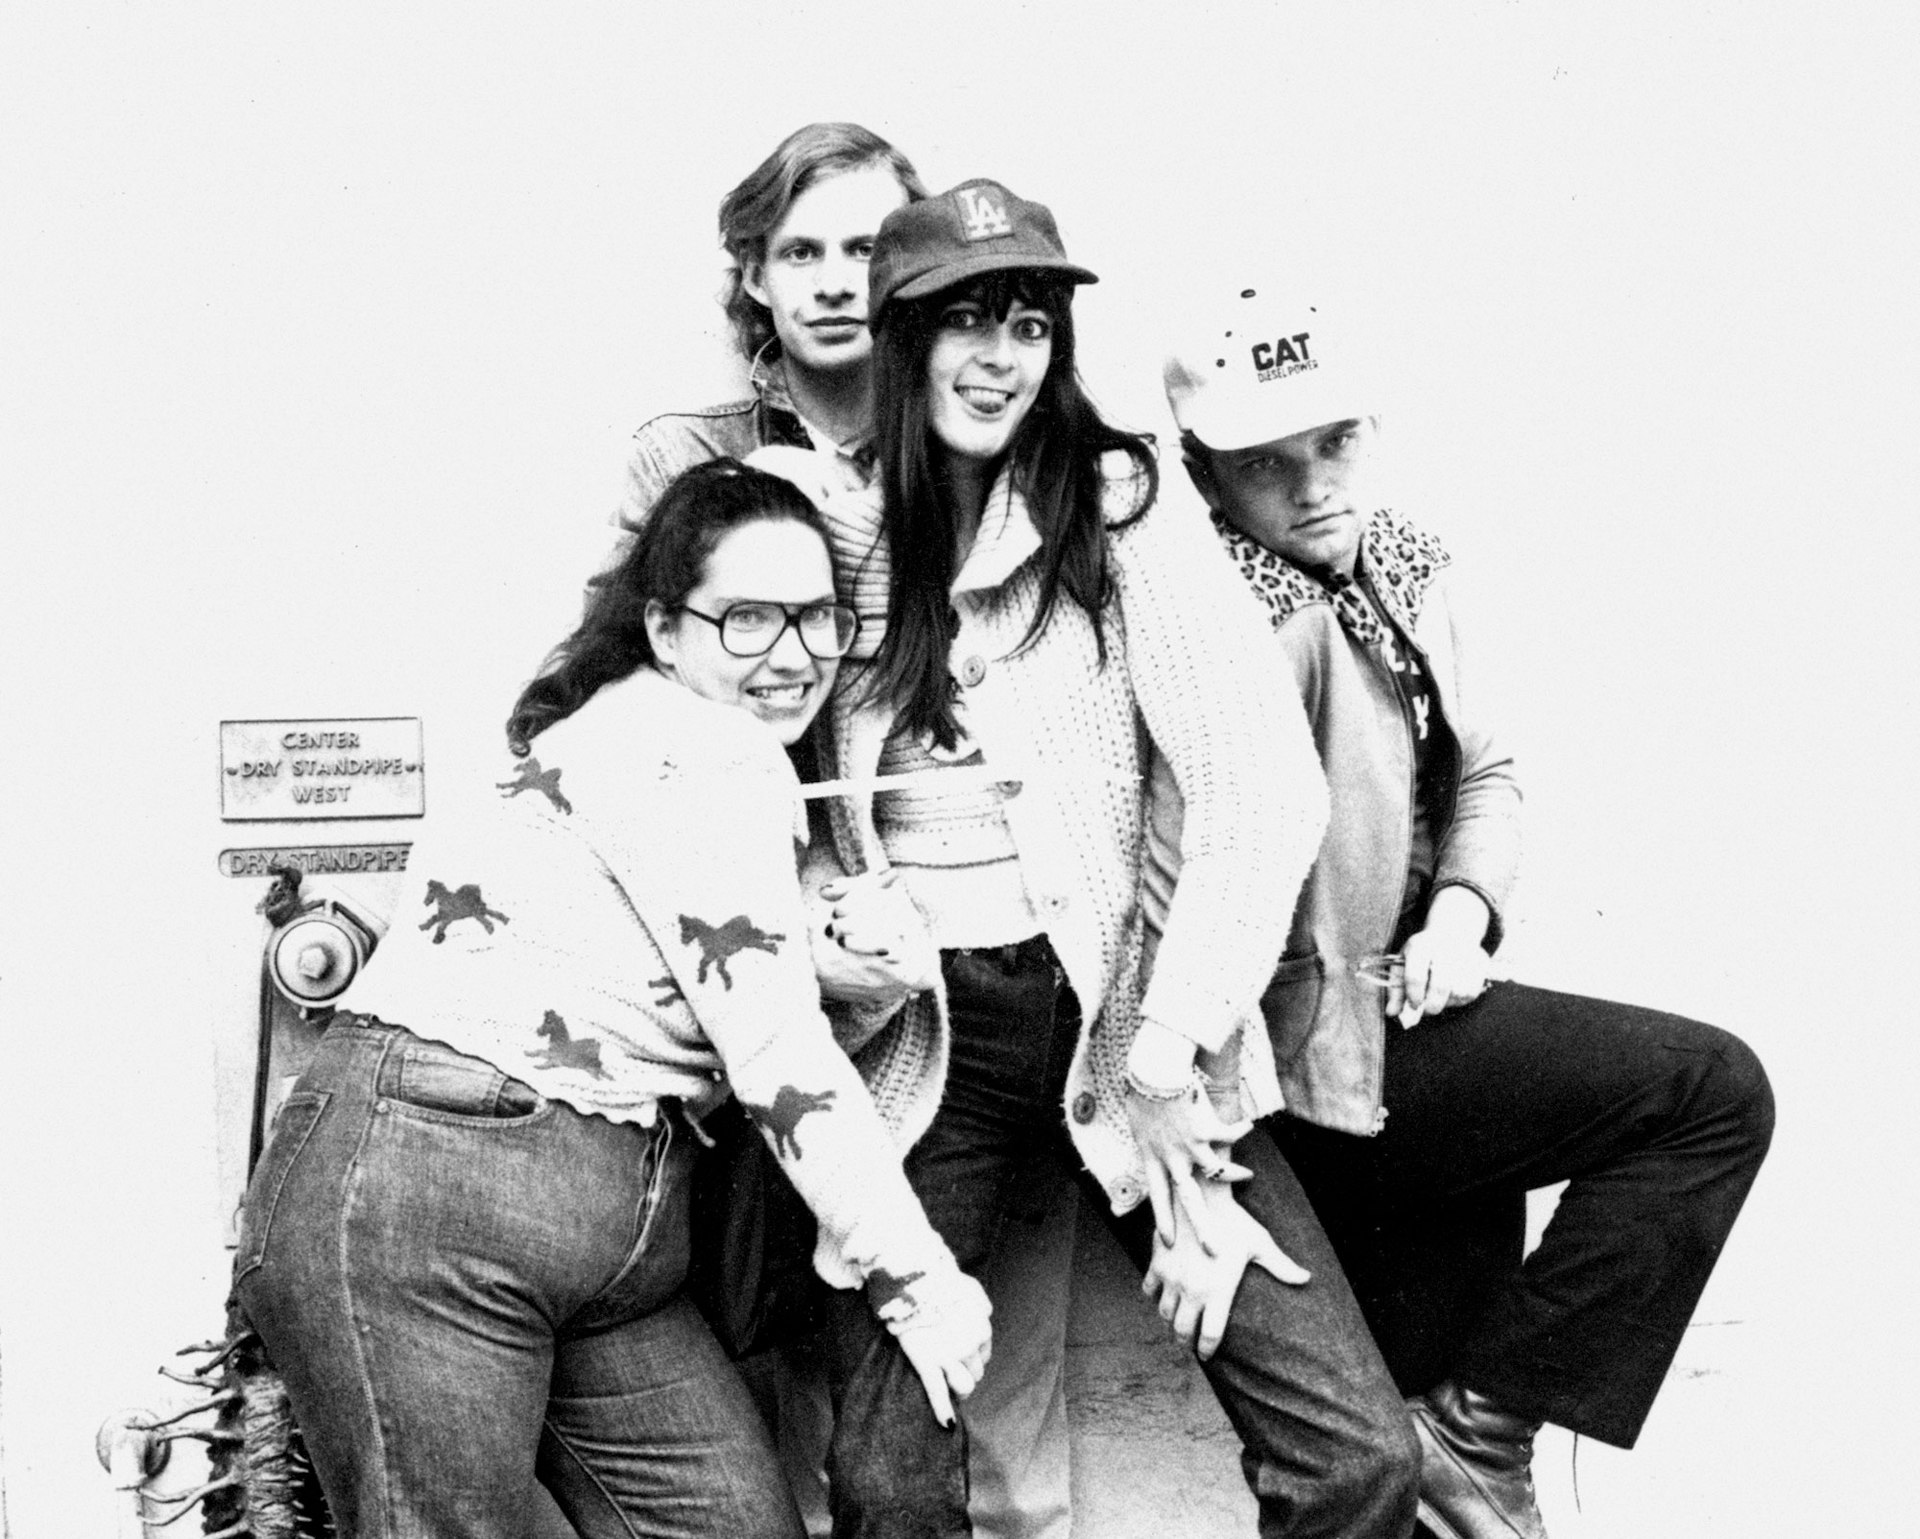 Out and about in Los Angeles with friends Kitten, Eric and Skot, 1976.